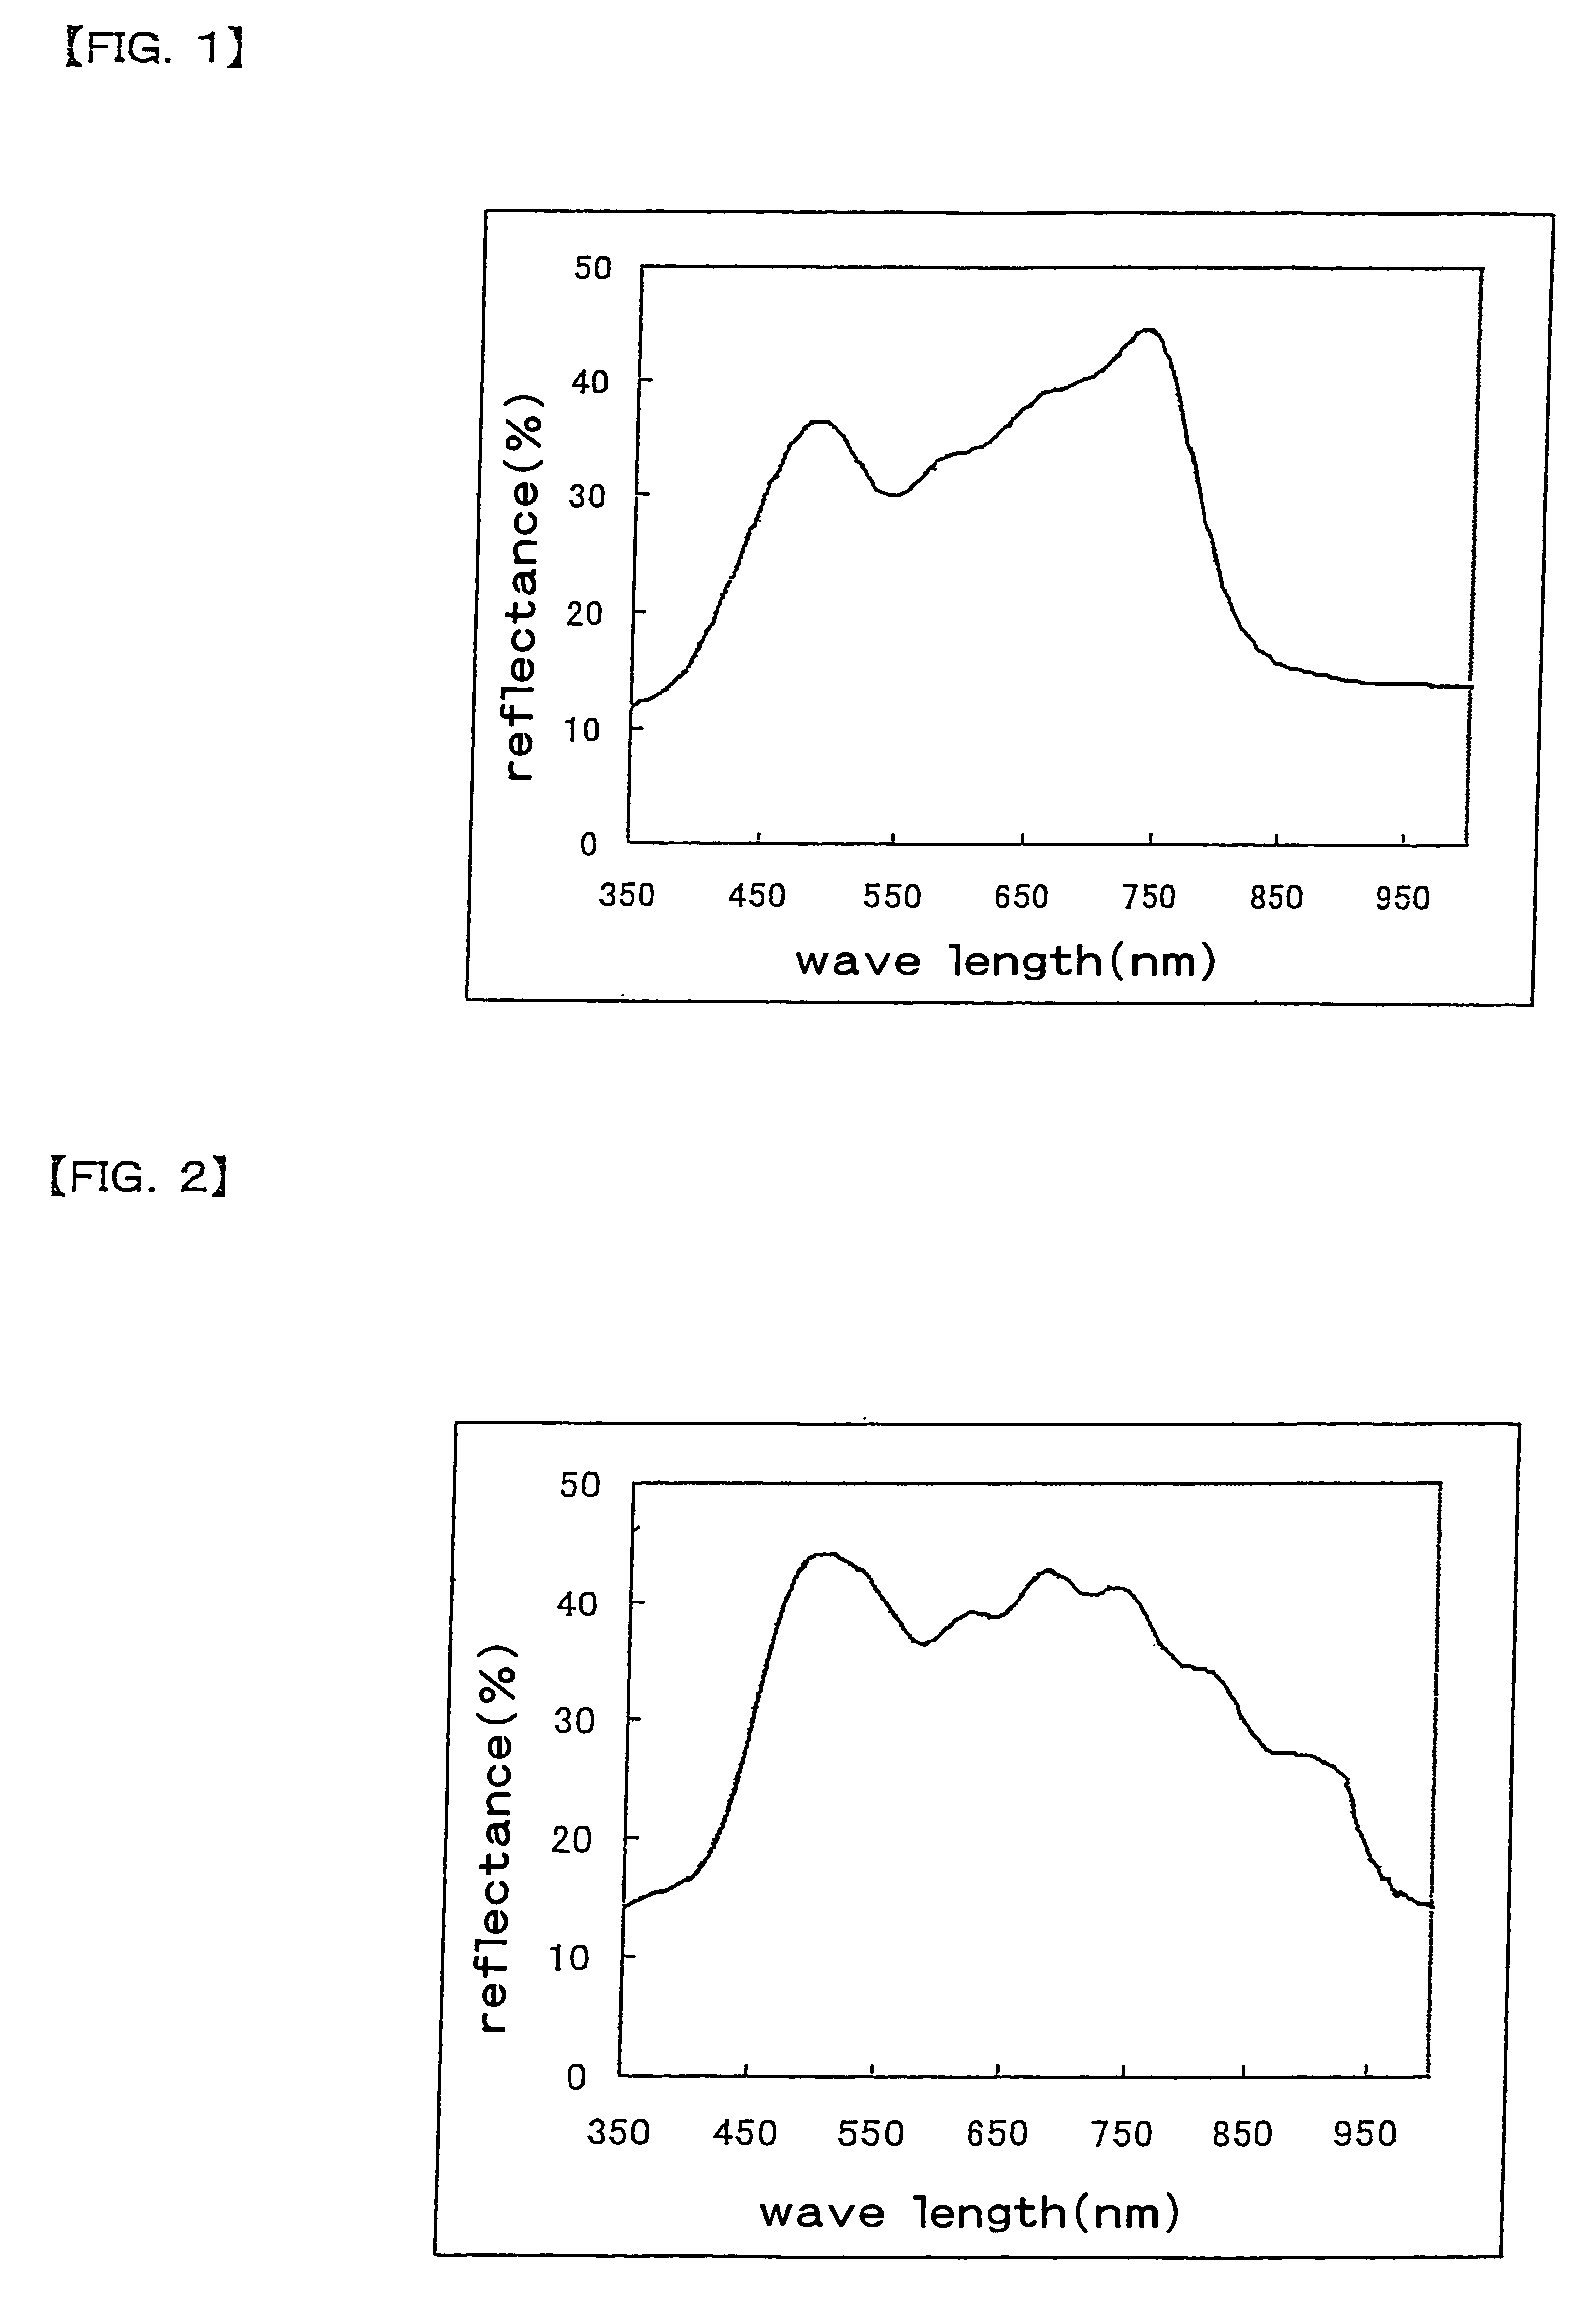 Broad-band-cholesteric liquid-crystal film, process for producing the same, circularly polarizing plate, linearly polarizing element, illiminator, and liquid-crystal display